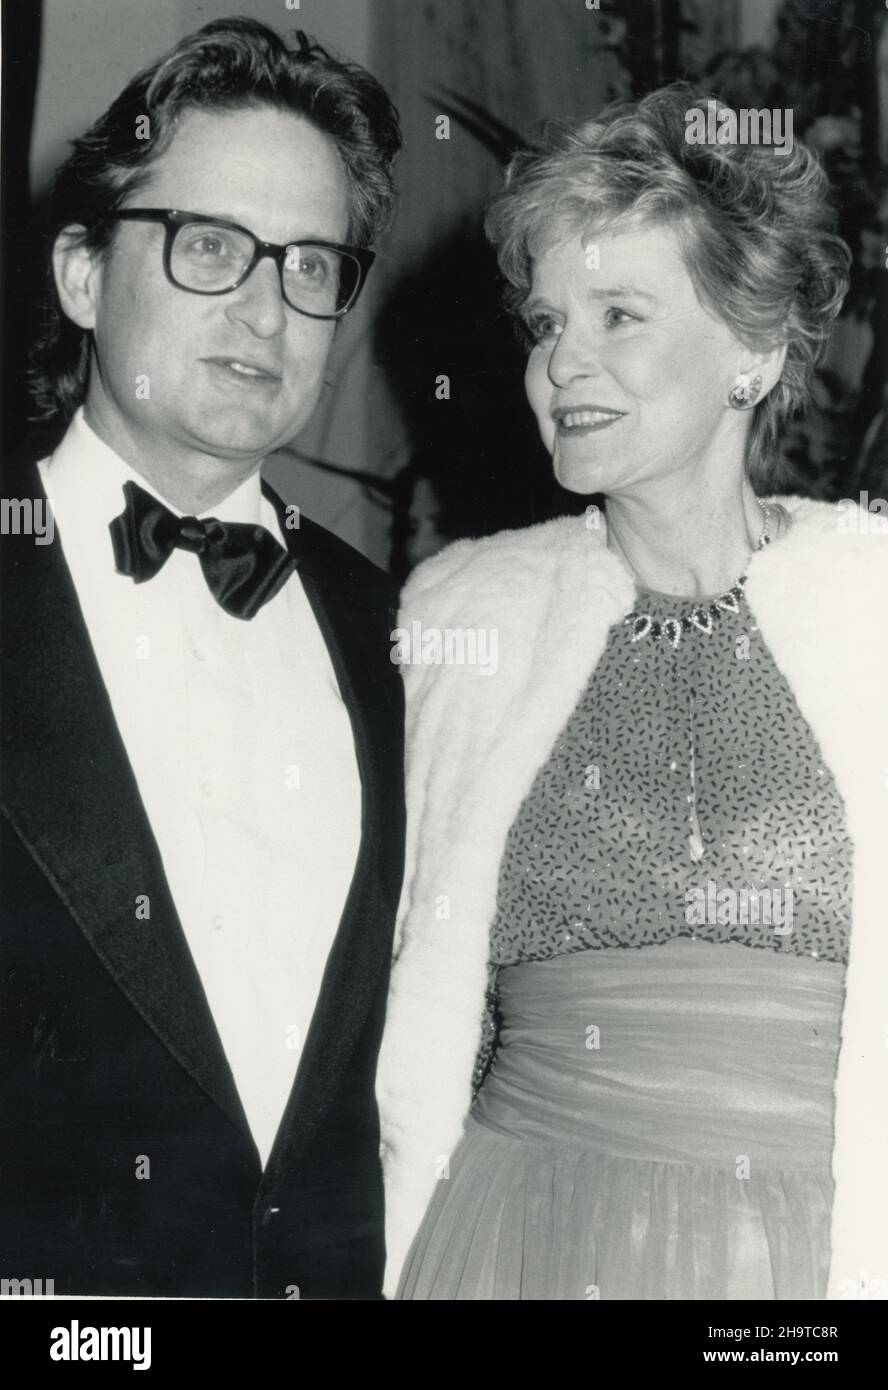 Los Angeles Caa Library Michael Douglas And Mother Diana Douglas At Event Circa 1988 Ref